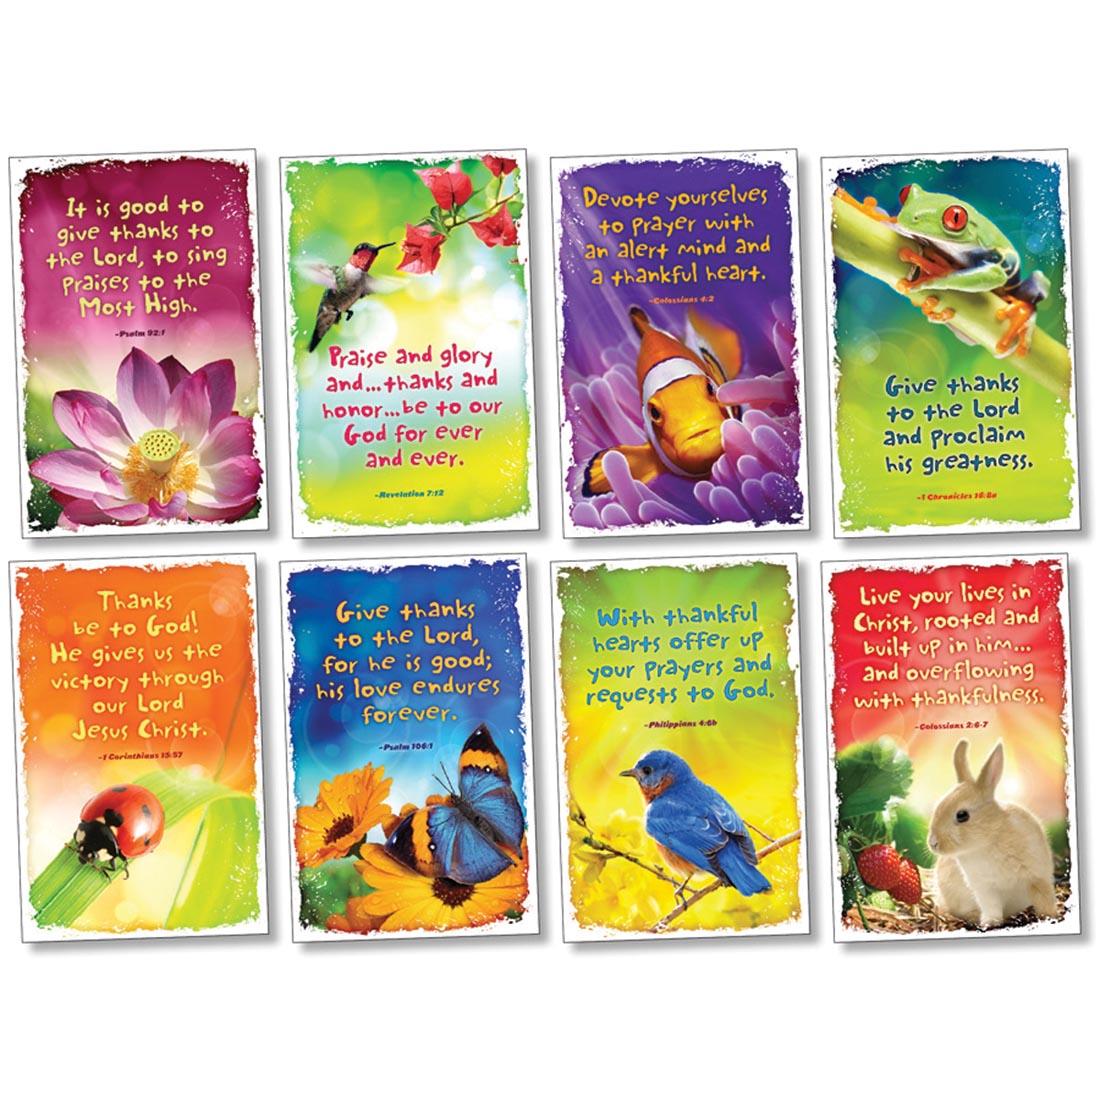 poster set with bible verses about praising God